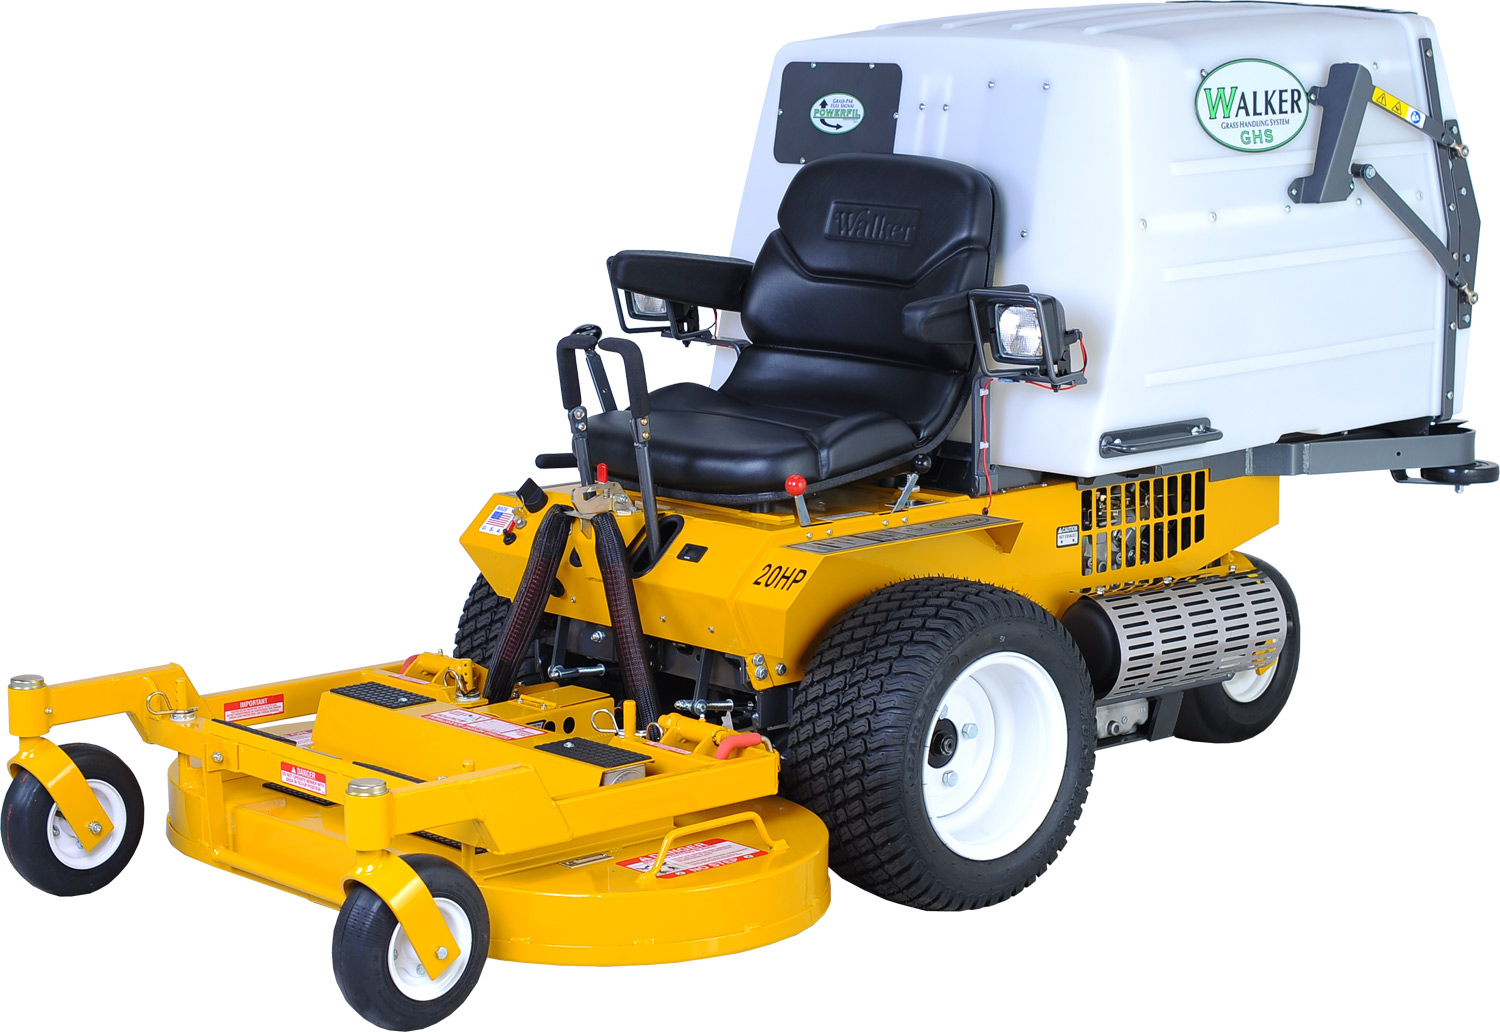 Walker MCGHSCEU 21HP Petrol Out Front Zero-Turn Ride-On Mower (with Manual- Dump Integrated Collector)